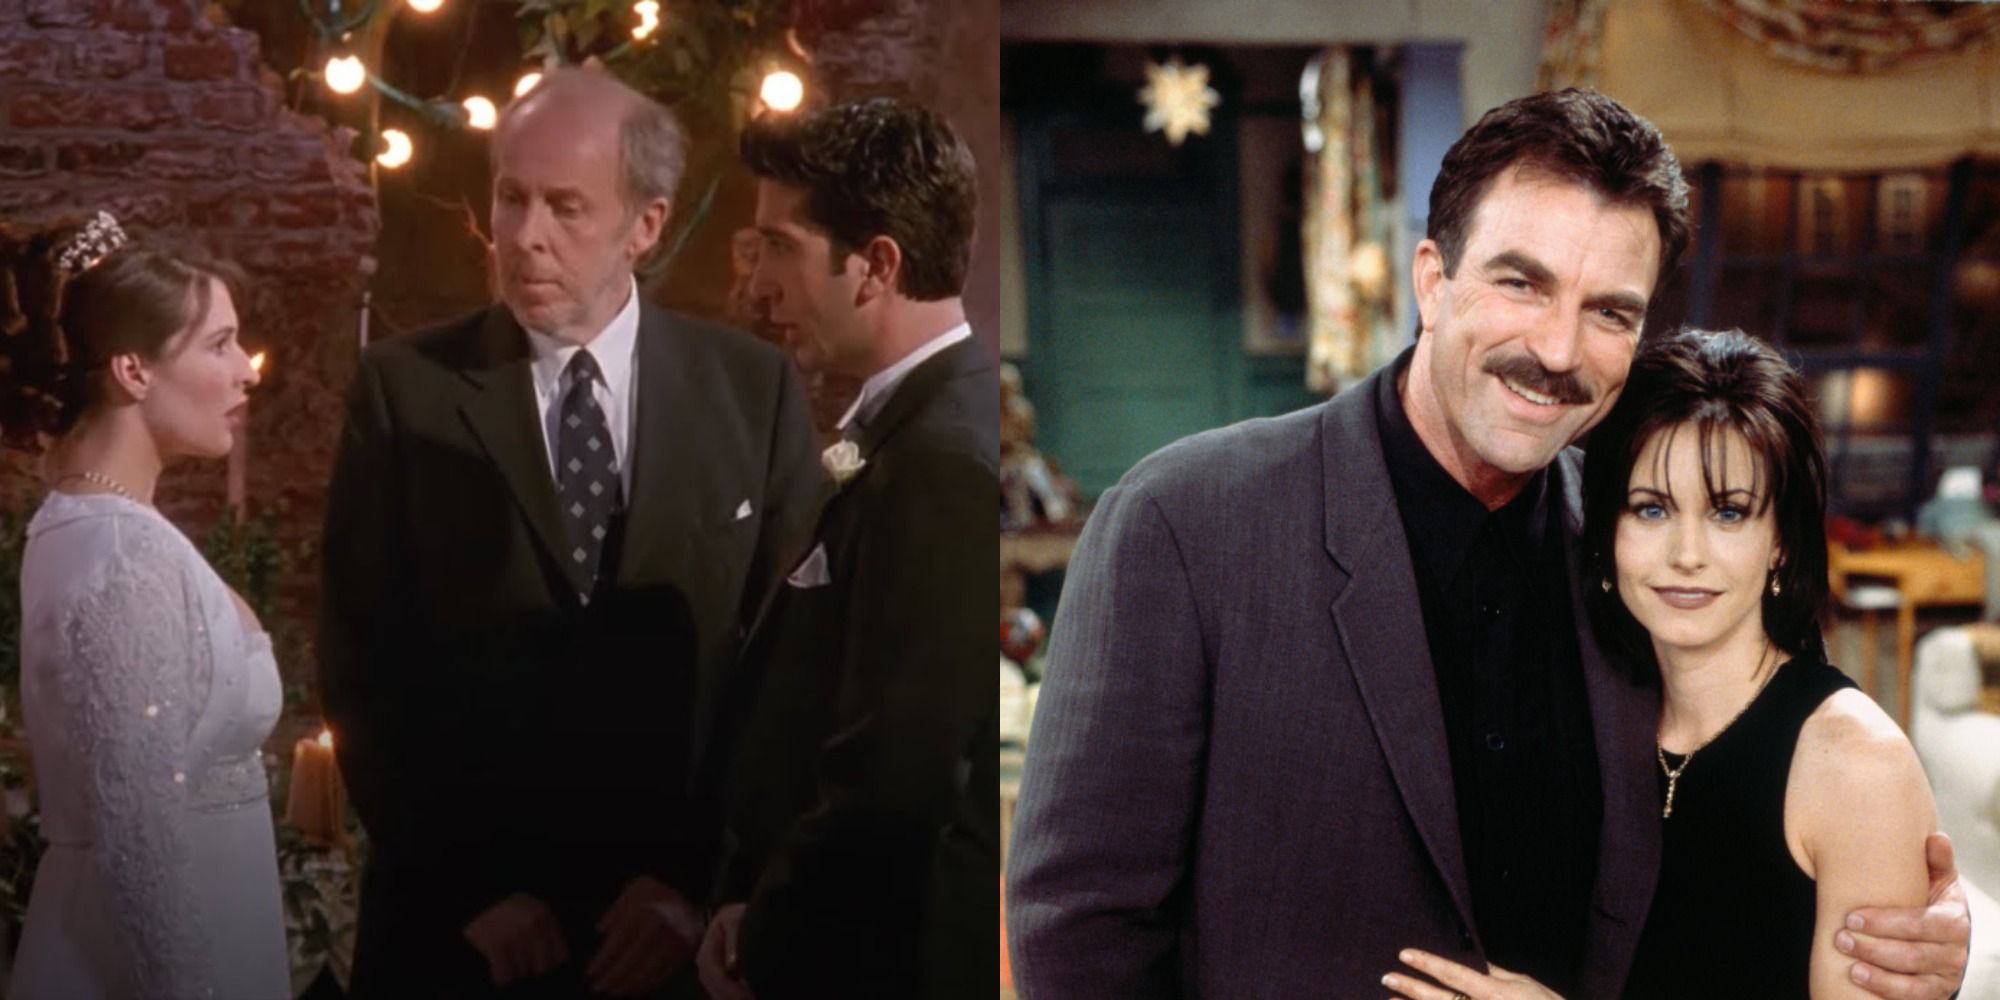 Friends: 10 Plot Twists That Everyone Saw Coming